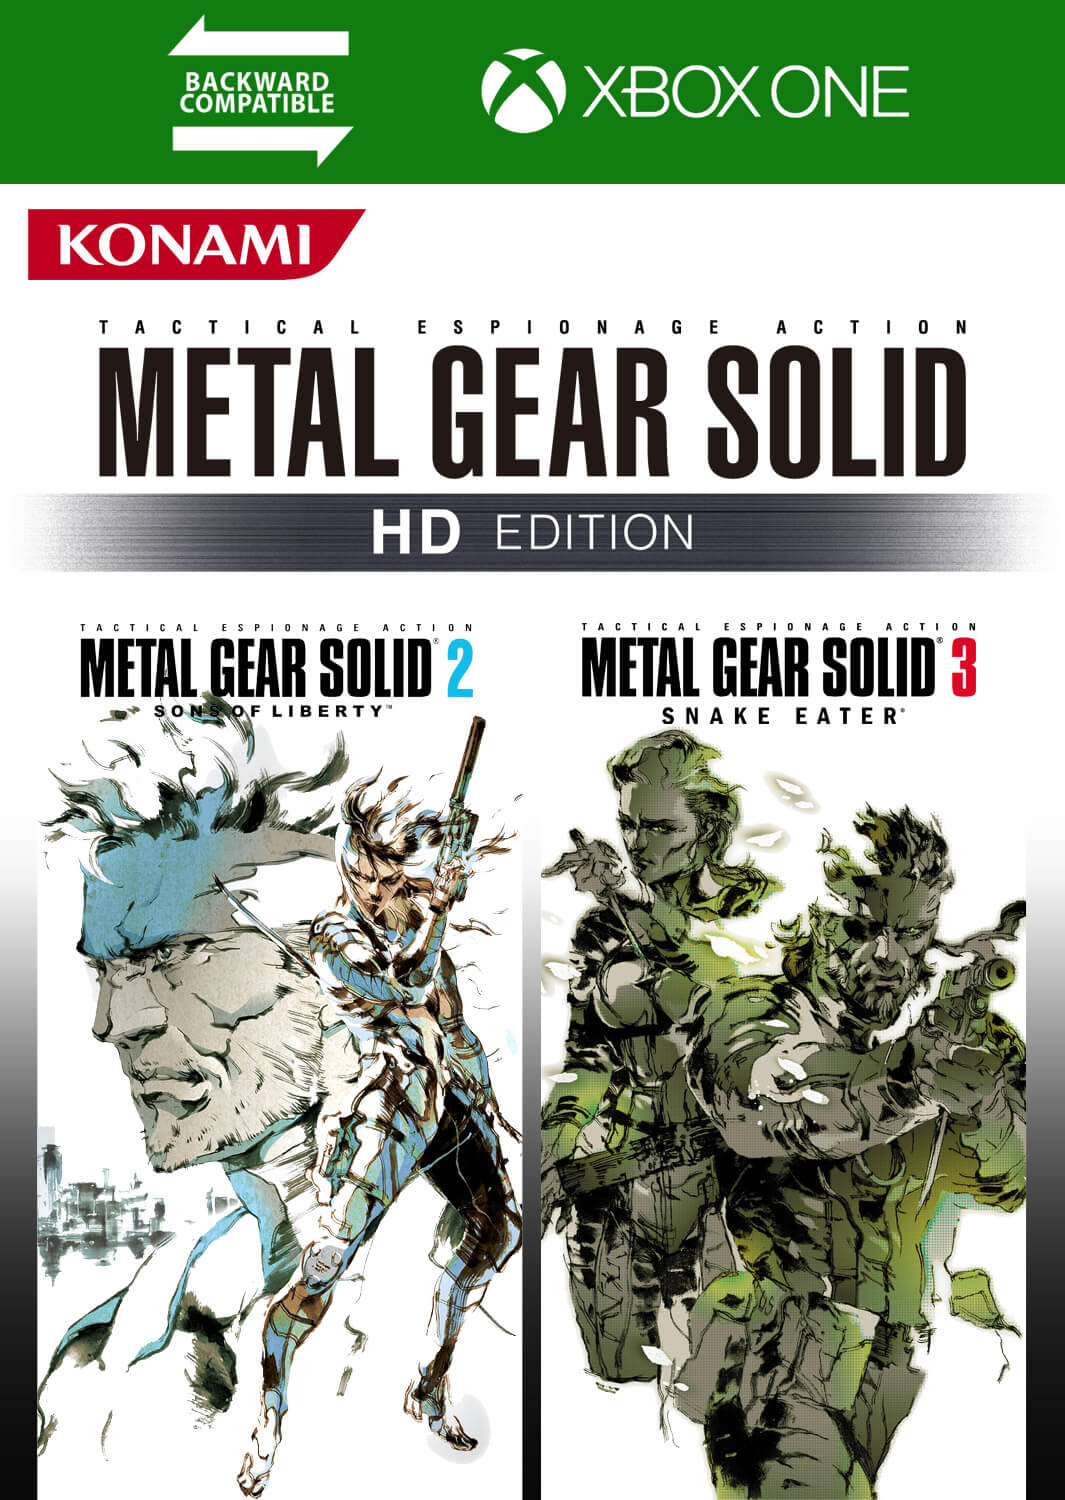 Metal-Gear-Solid-2-%2526-3-is-Backwards-Compatible-on-Xbox-One.jpg